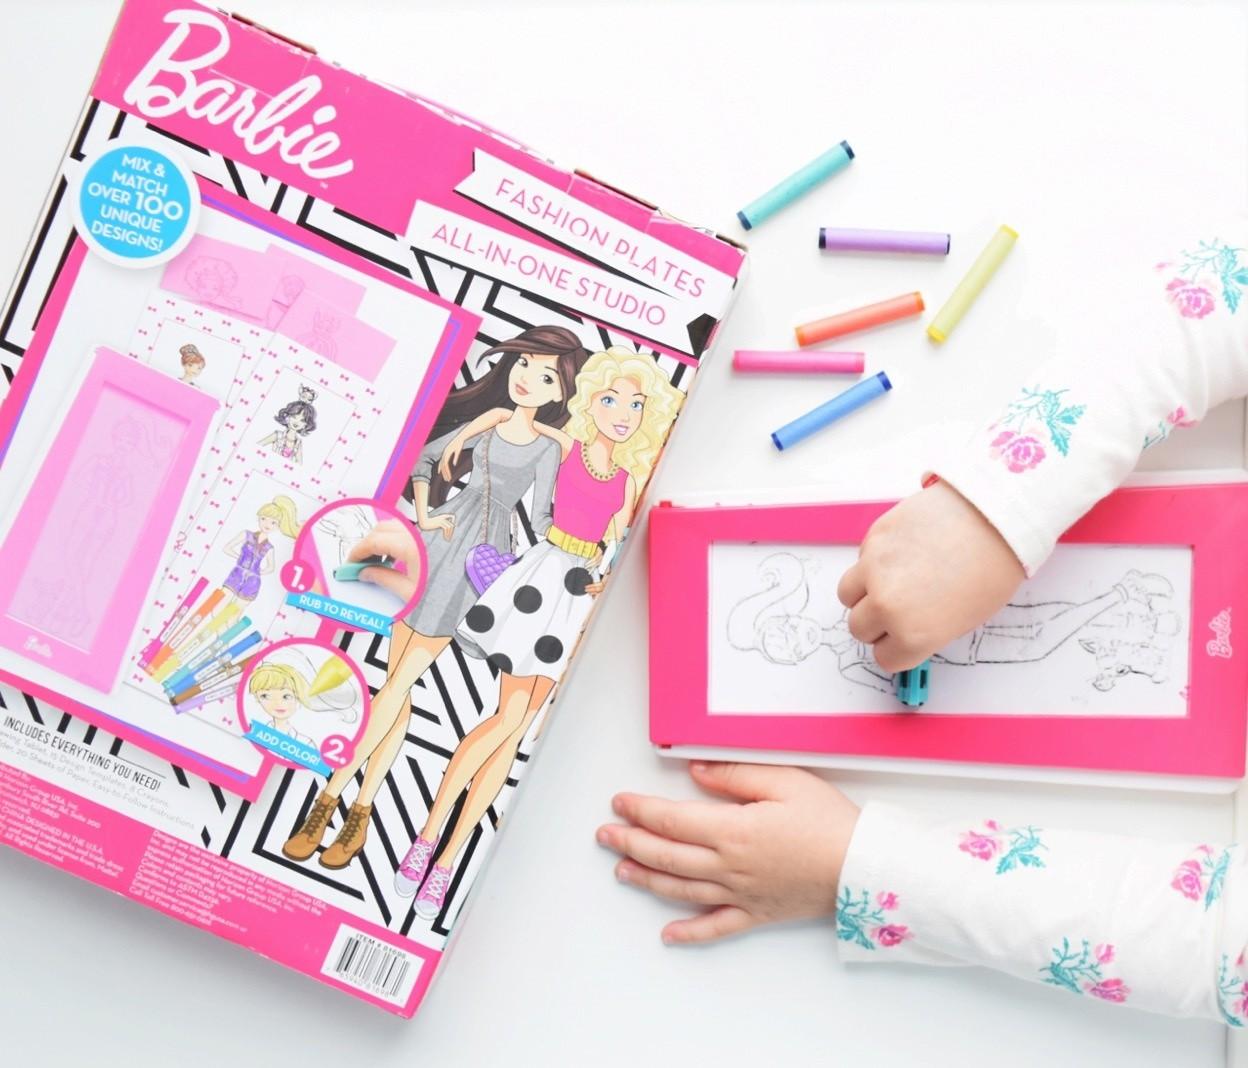 Barbie on X: Make your little one's stocking extra dreamy with the #Barbie  Make Your Own Lip Balm, Bath Bomb, Water Bottle, and Fashion Plate Activity  Kits. With interactive tasks her creativity